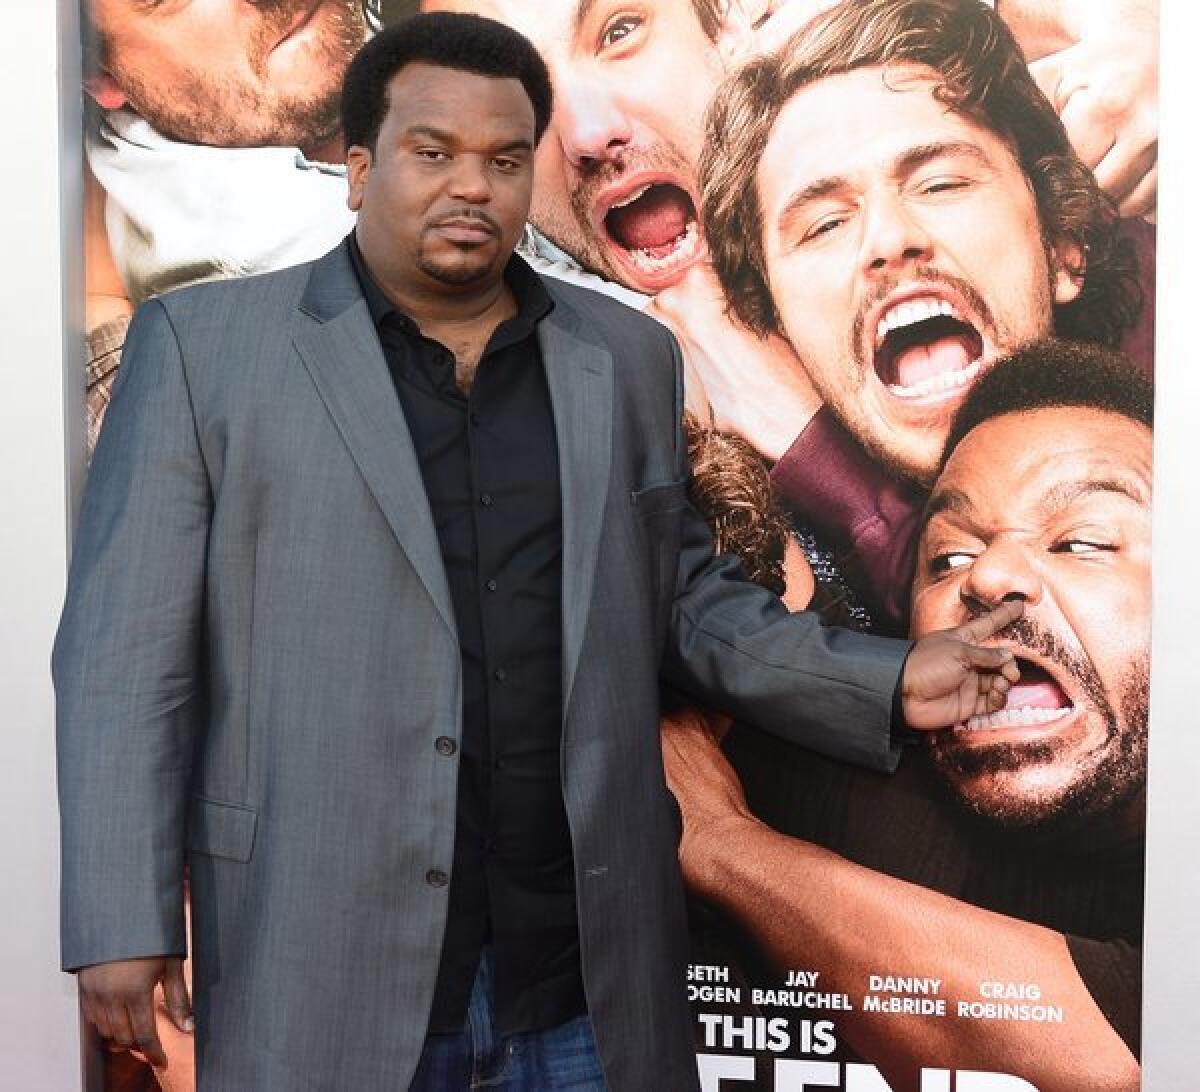 Craig Robinson of "The Office" and "This Is the End" was detained and fined in the Bahamas for drug possession.